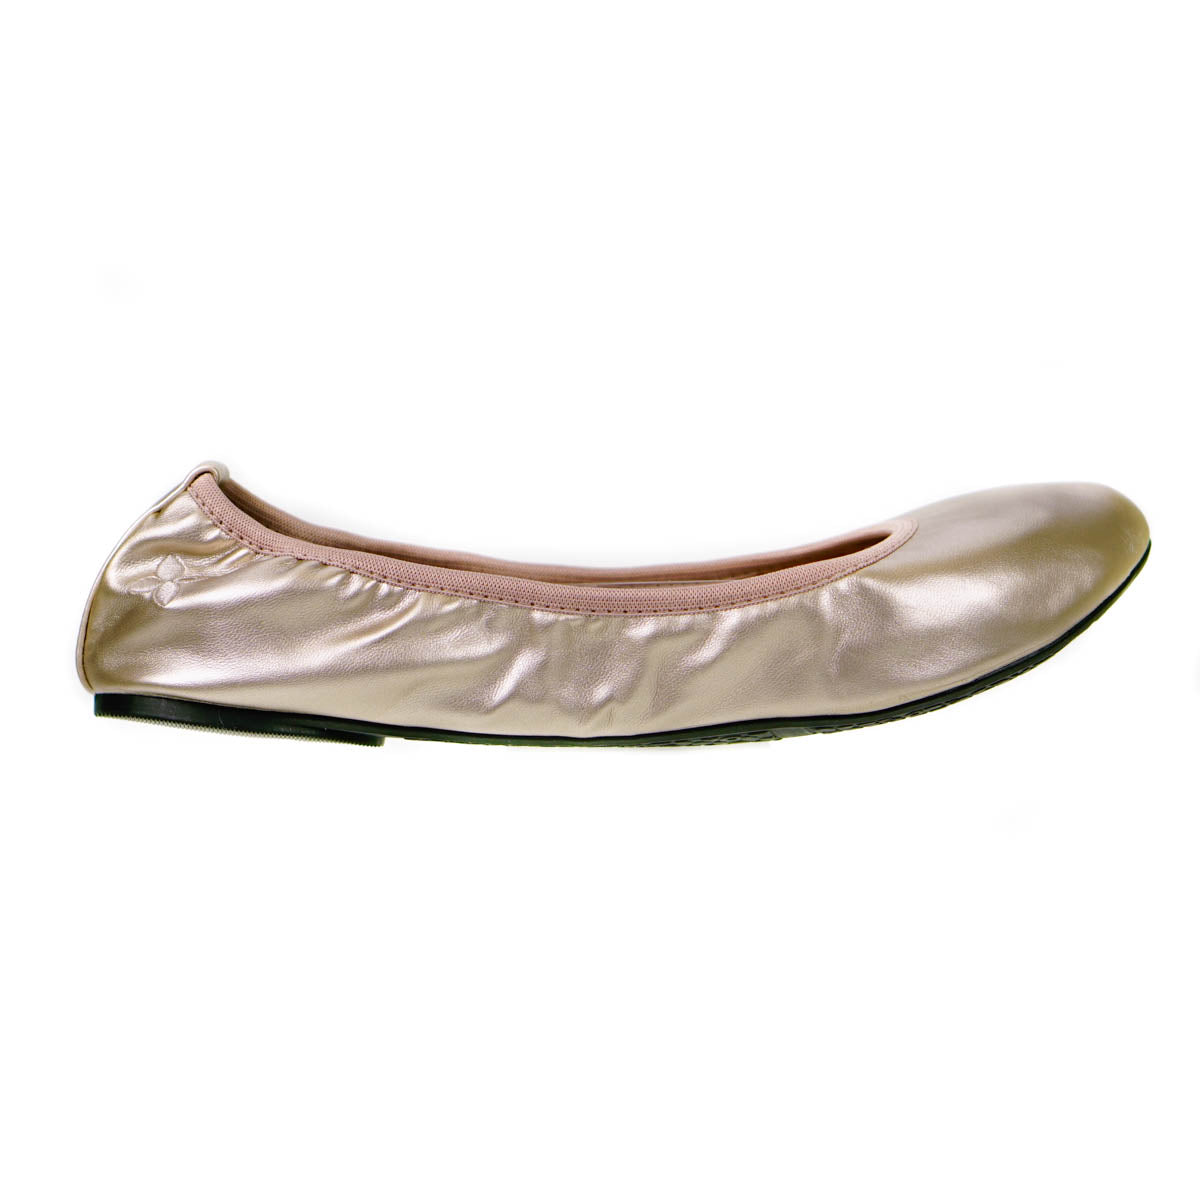 Butterfly Twists Sophia Fold Up Ballerina Shoes Rose Gold Size 3 (36)